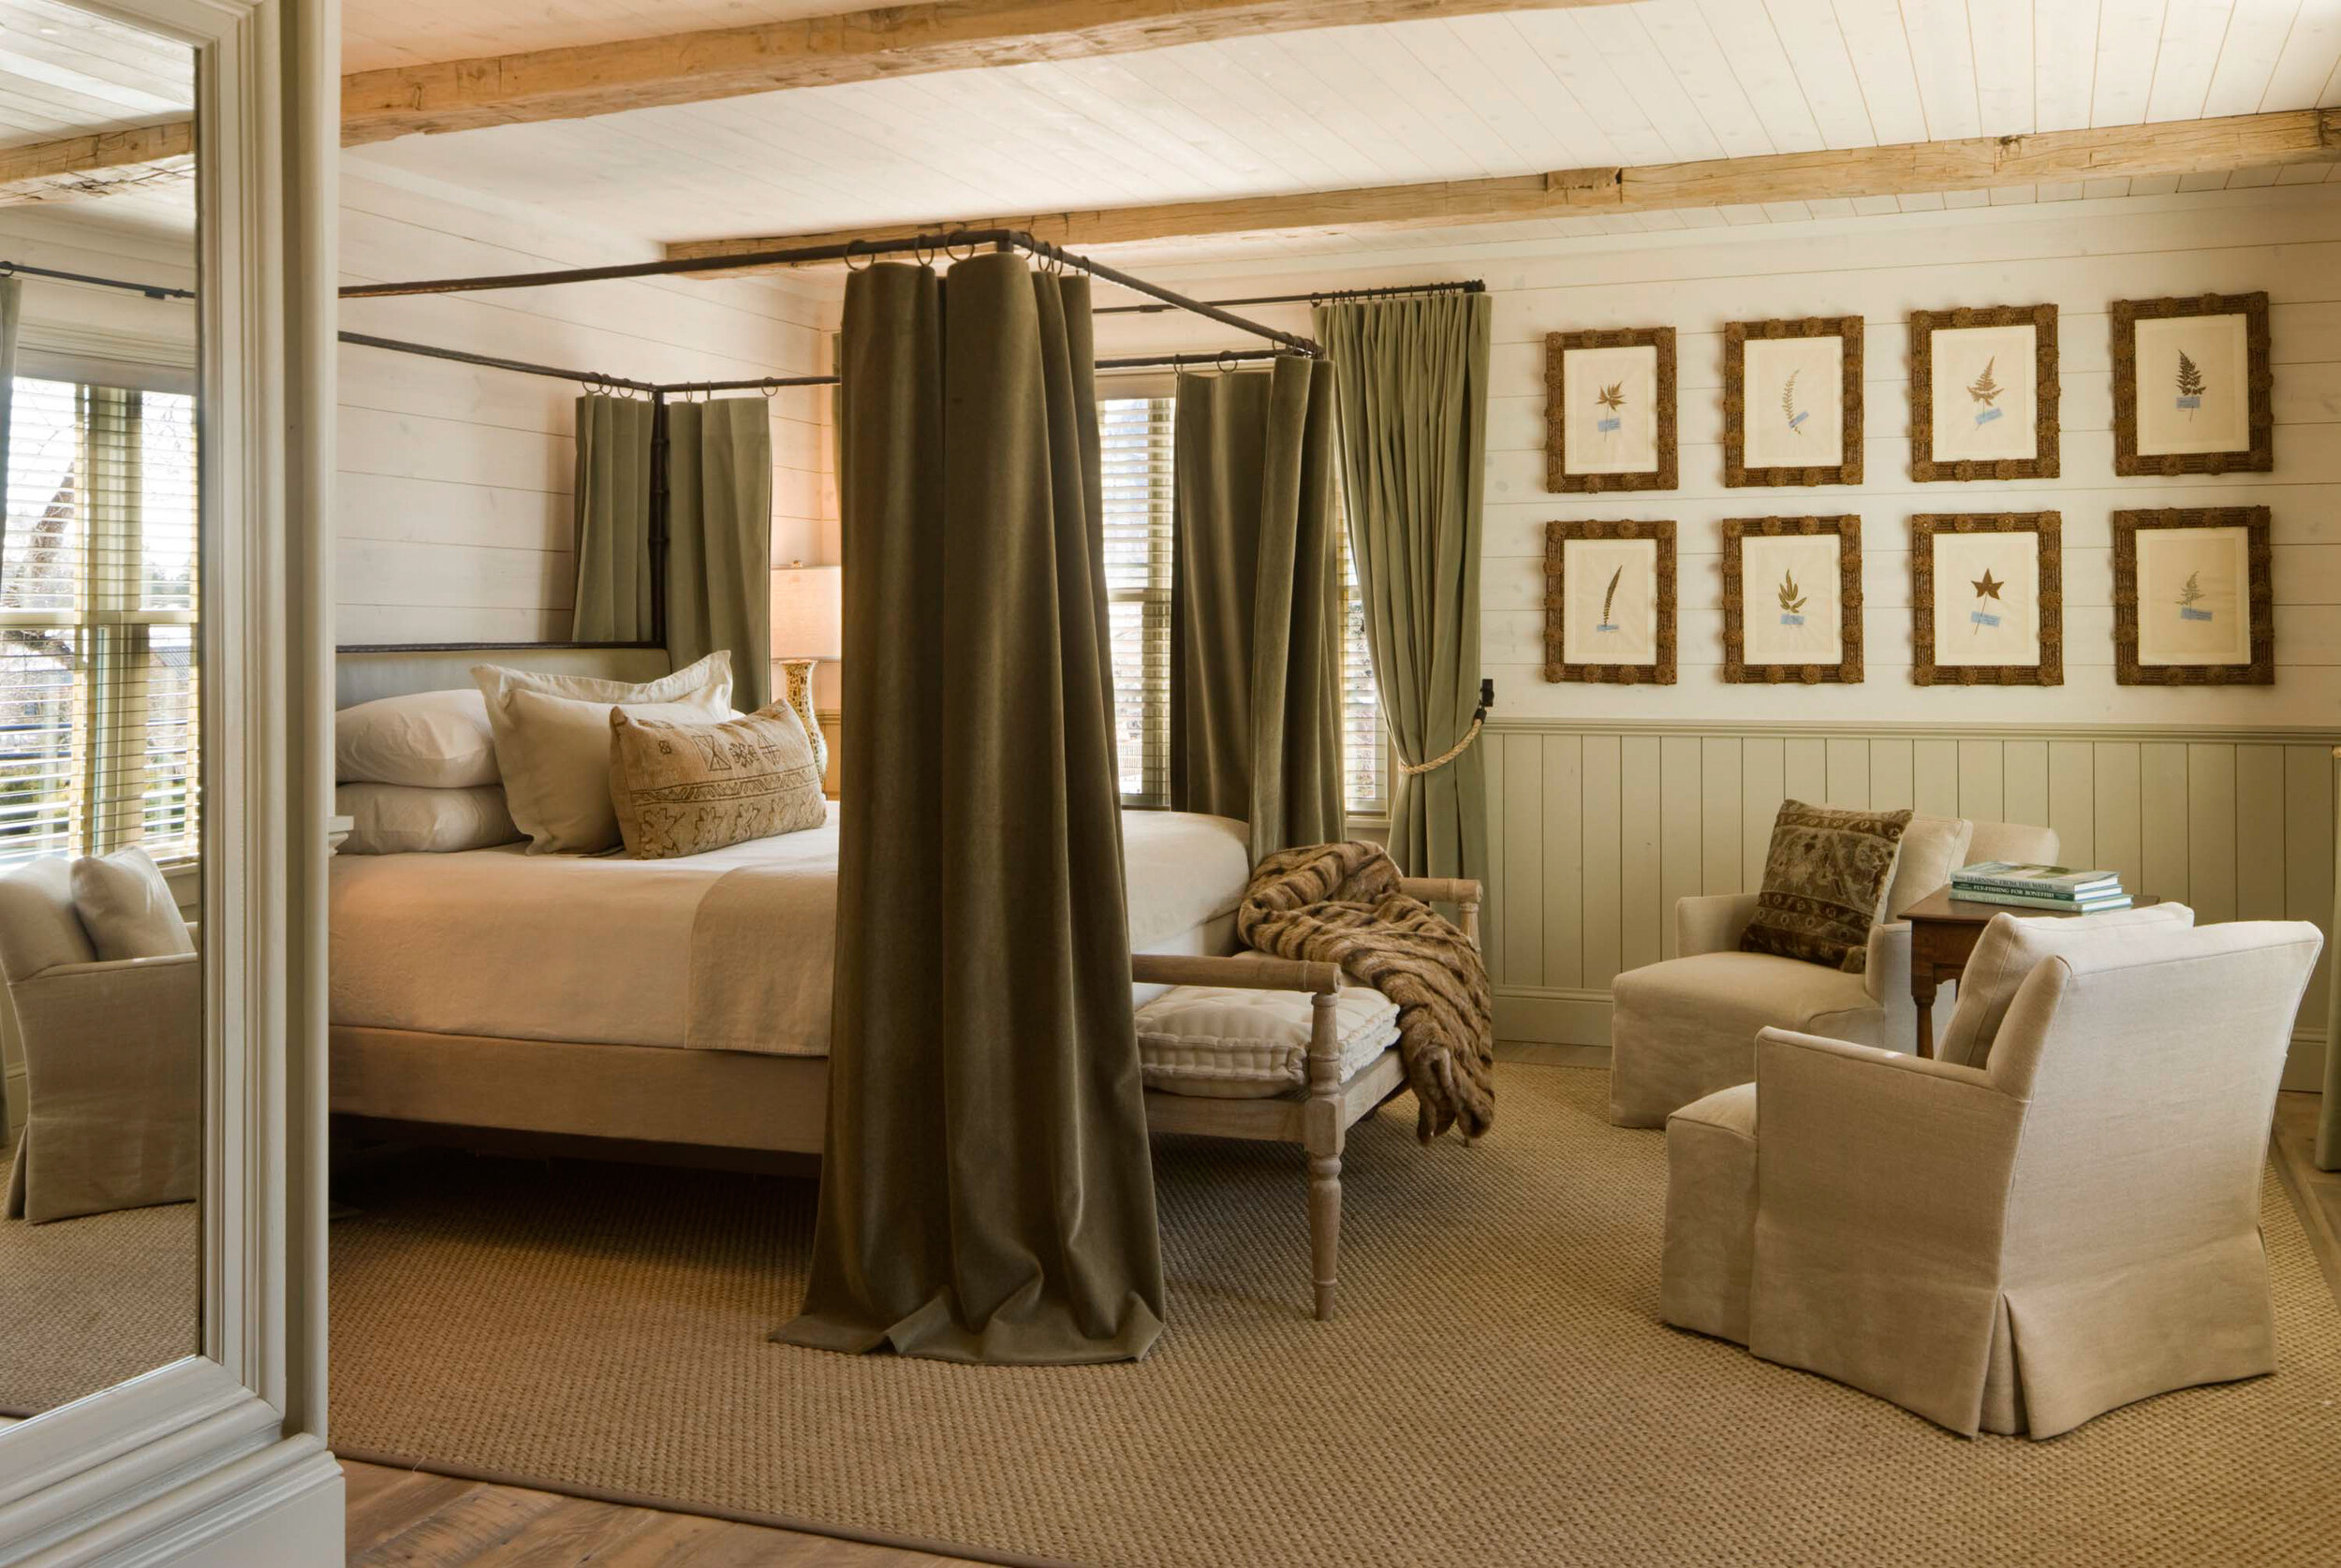   One of the bedrooms at Scarp Ridge Lodge (photo credit: Eleven Experience)  